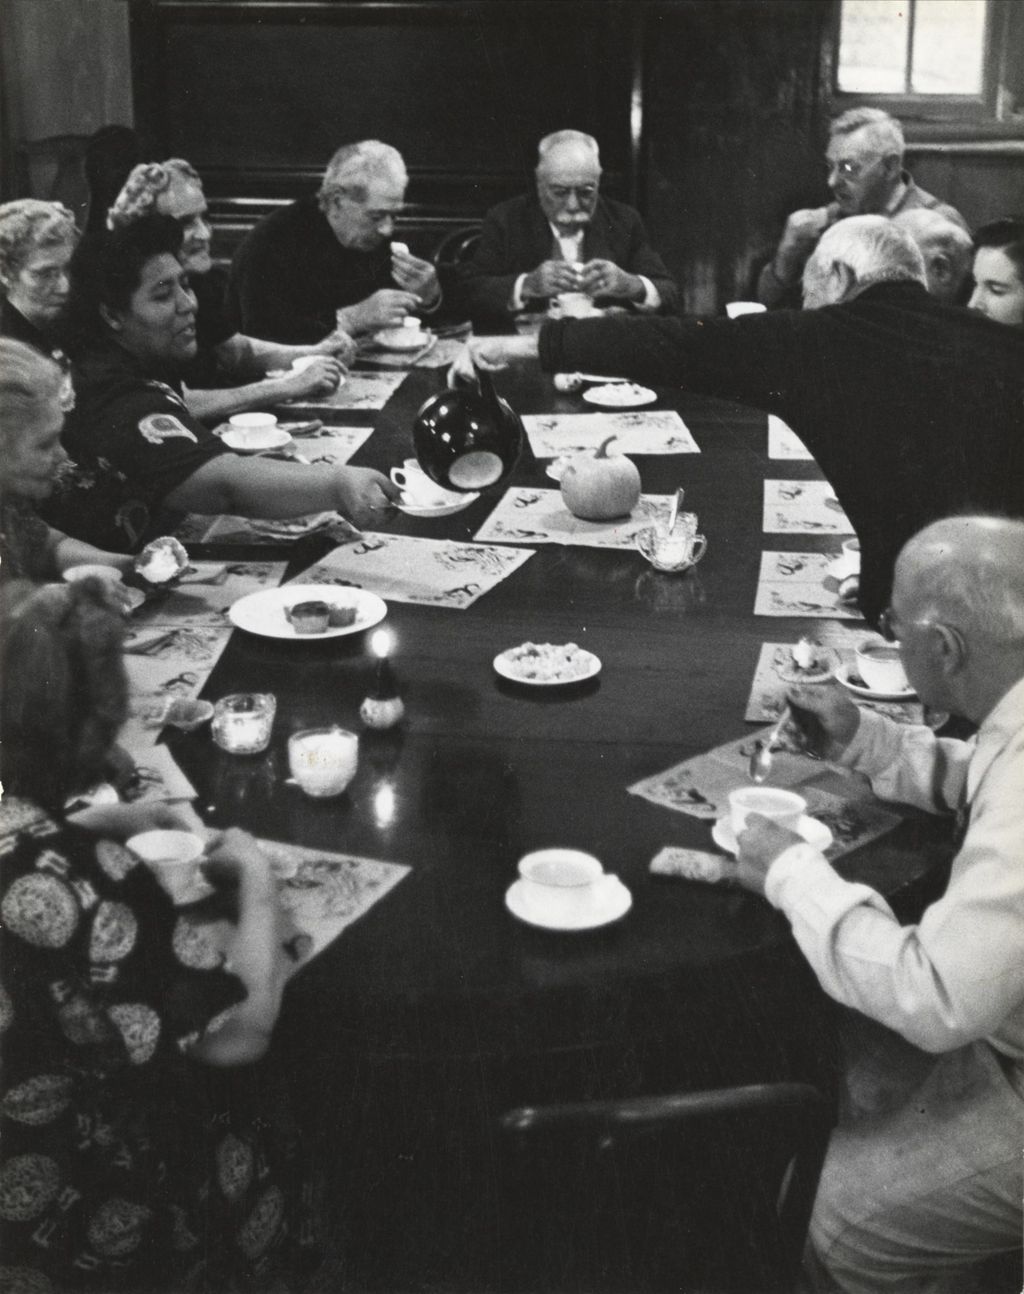 Miniature of Members of the Hull-House senior citizens club having coffee or tea and cupcakes in the Residents Dining Hall